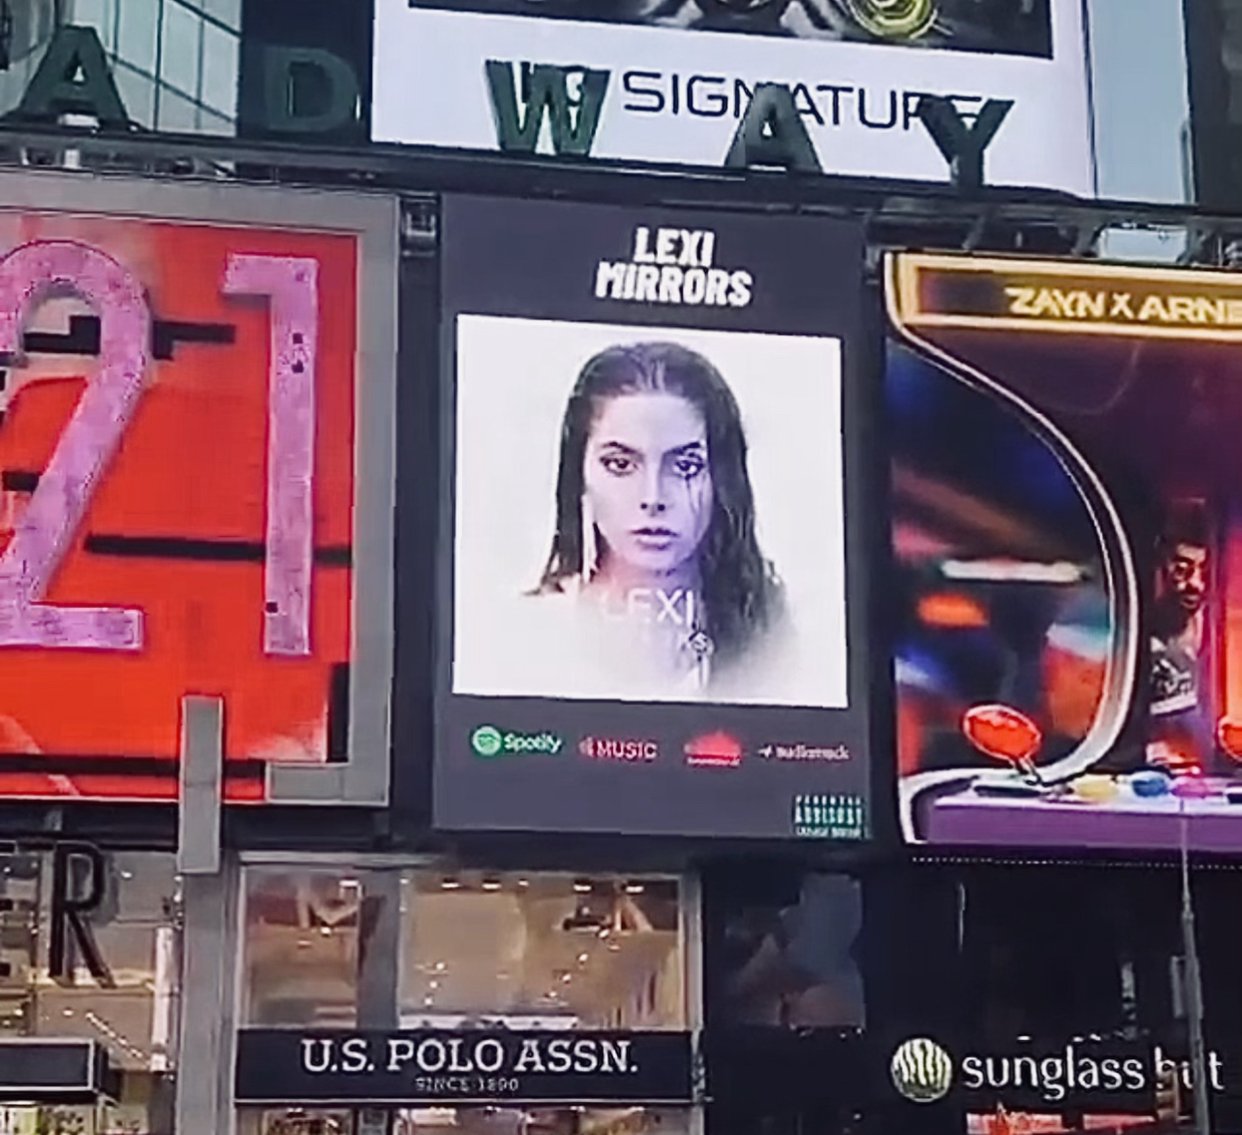 LEXI is Featured On A Billboard In Times Square For Her New Release "Mirrors"